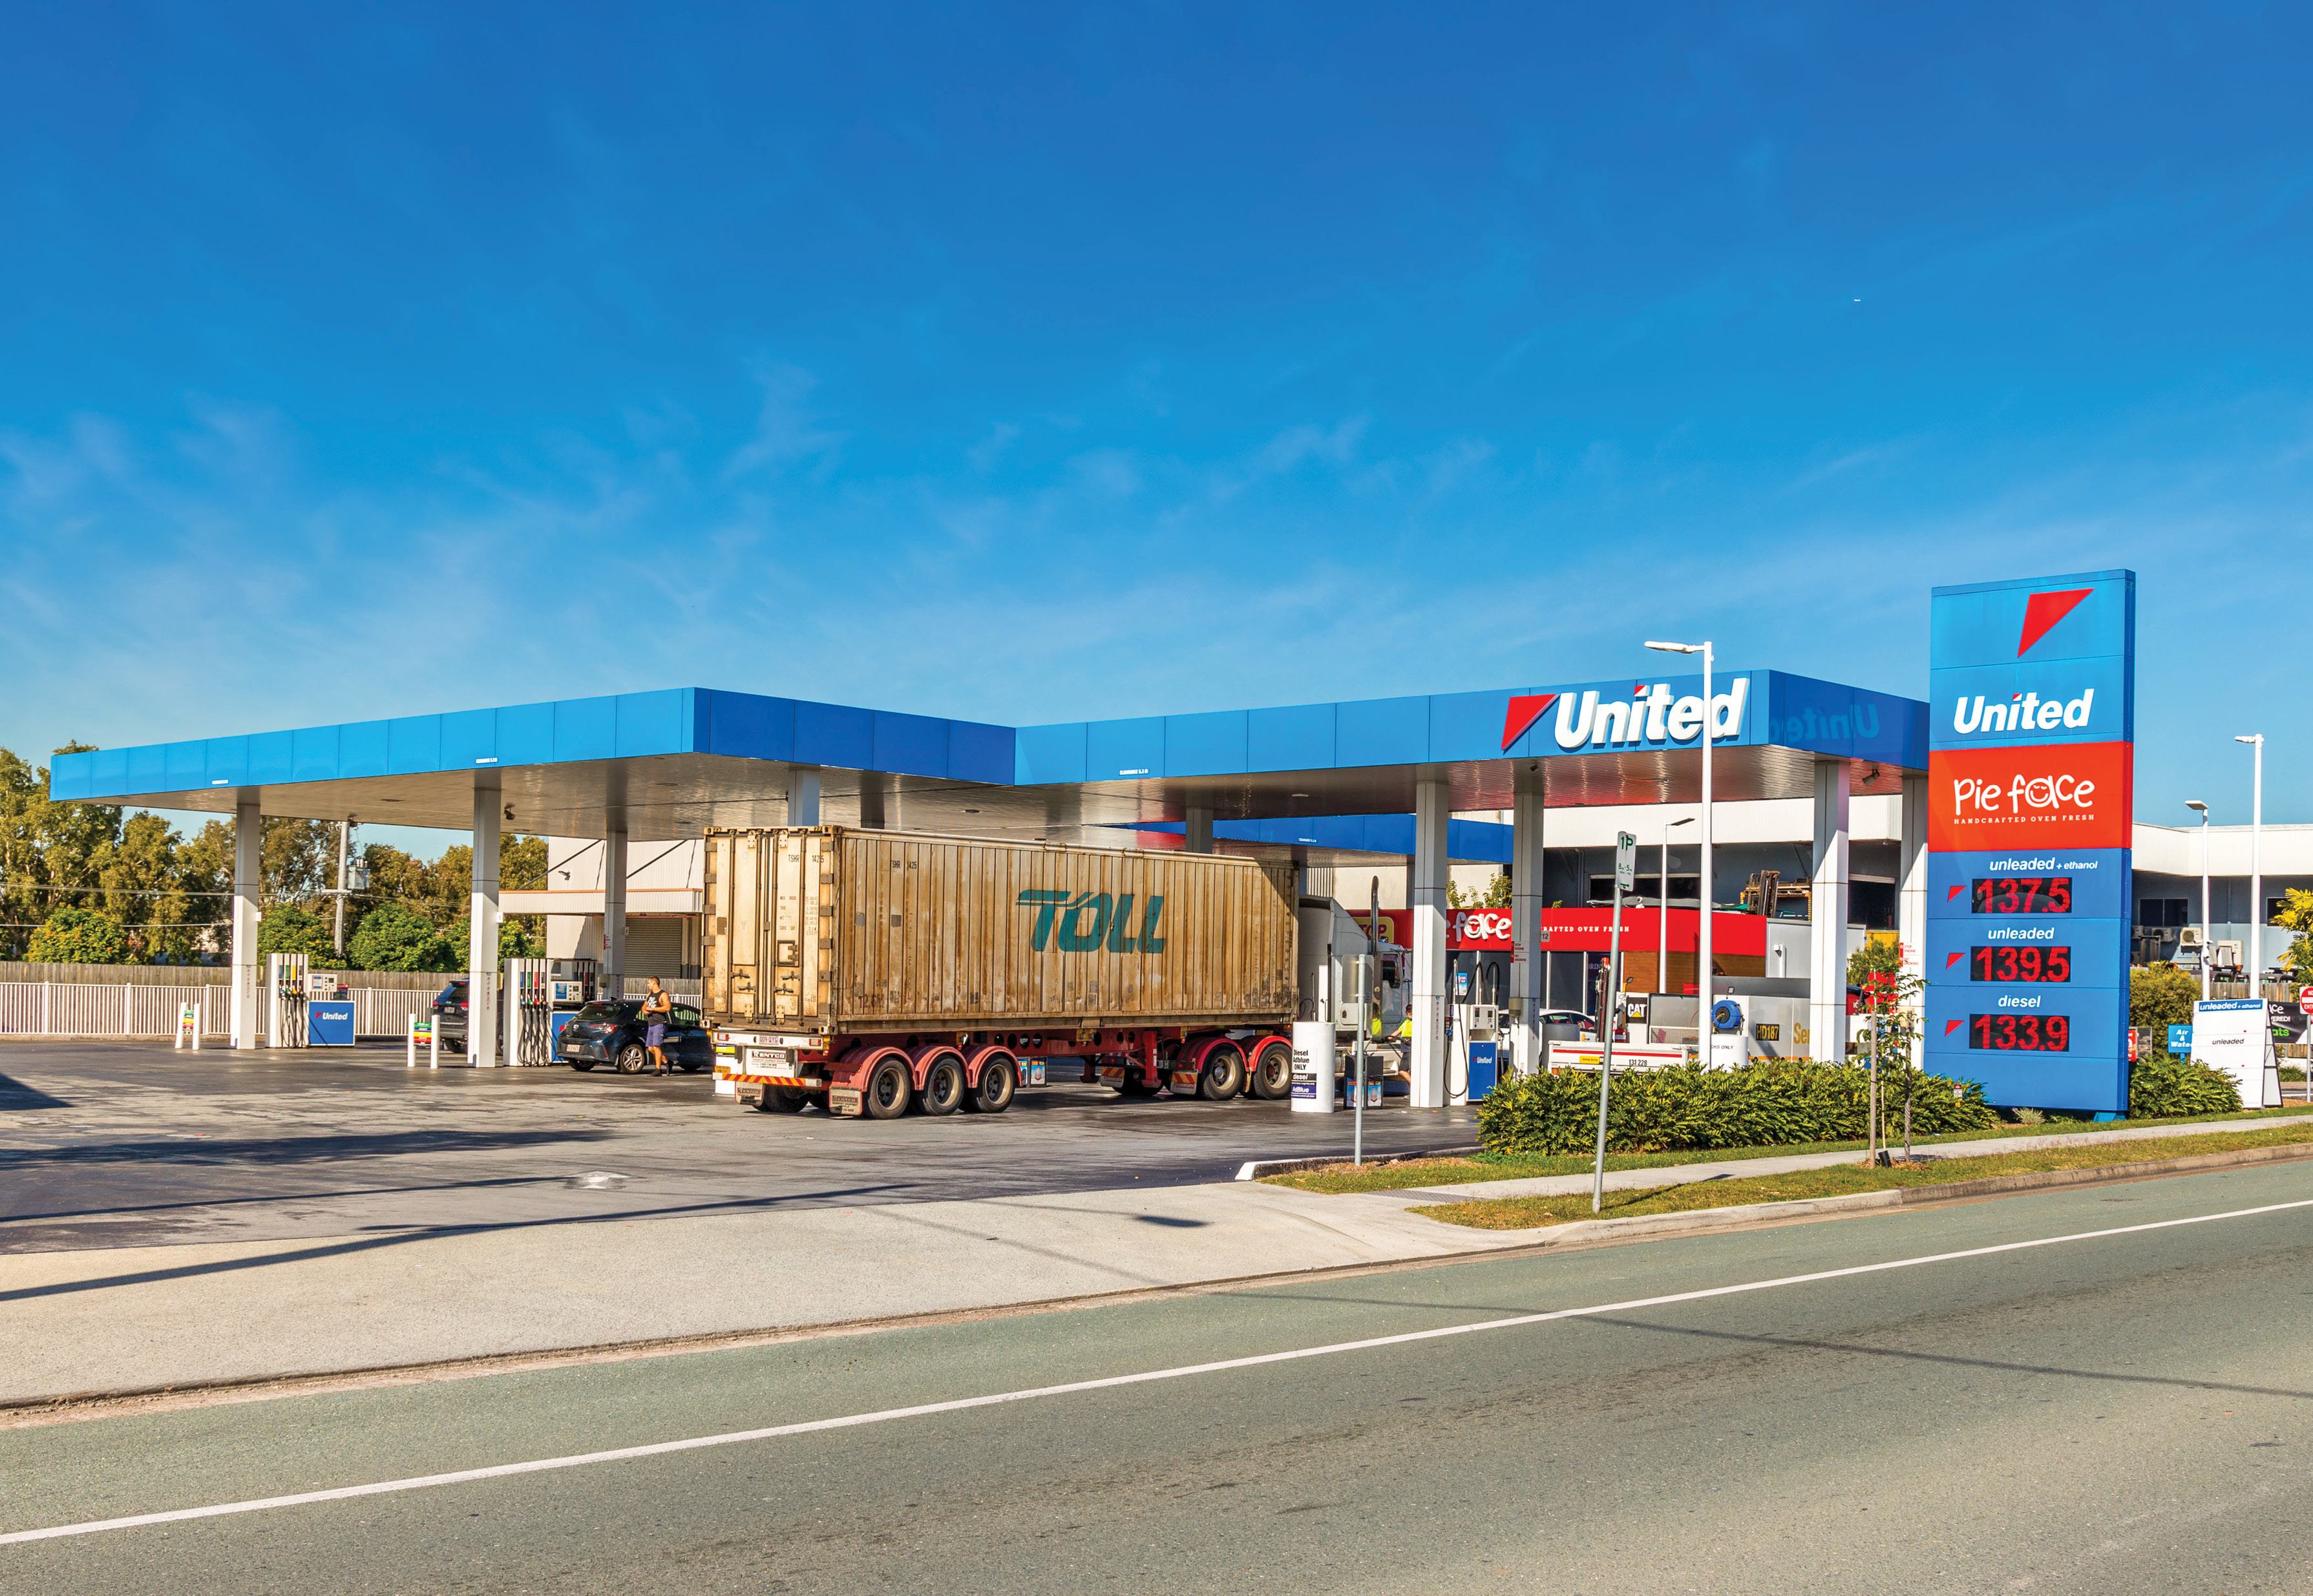 Regional service stations a real hit at Cushman & Wakefield’s National Investment Portfolio